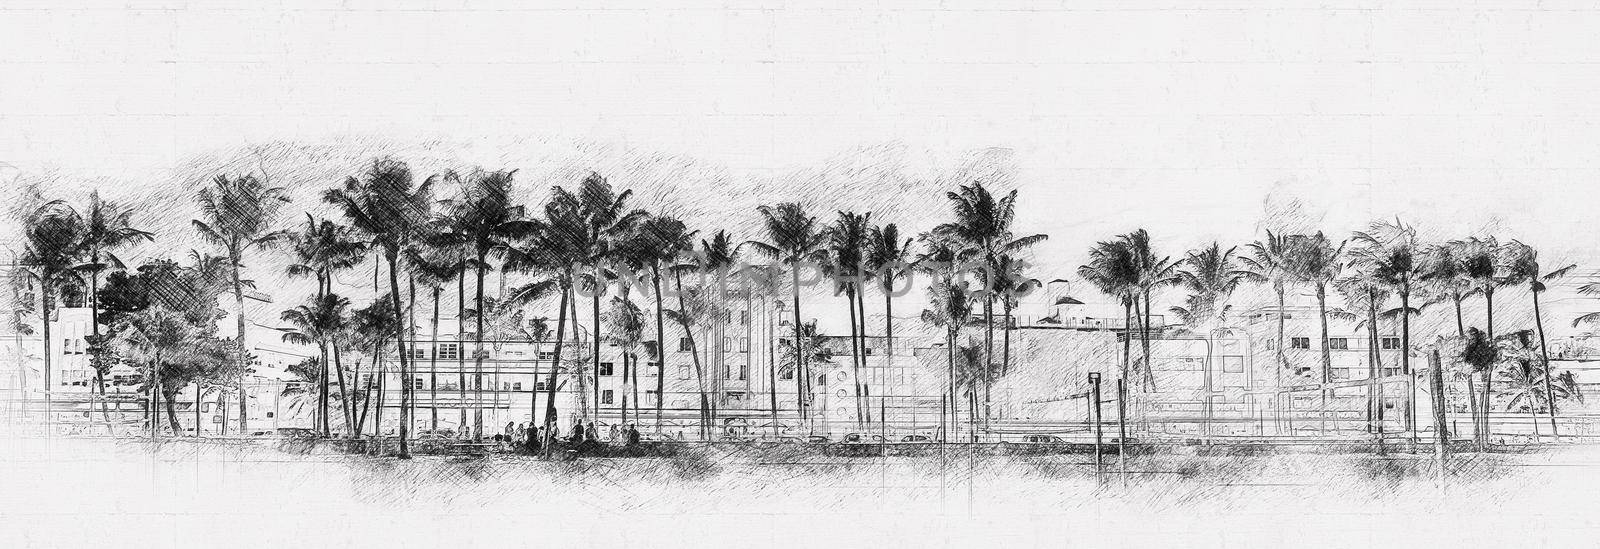 Miami Beach Ocean Drive hotels and restaurants at sunset. City skyline with palm trees at night. hand drawn style pencil sketch by Mariakray